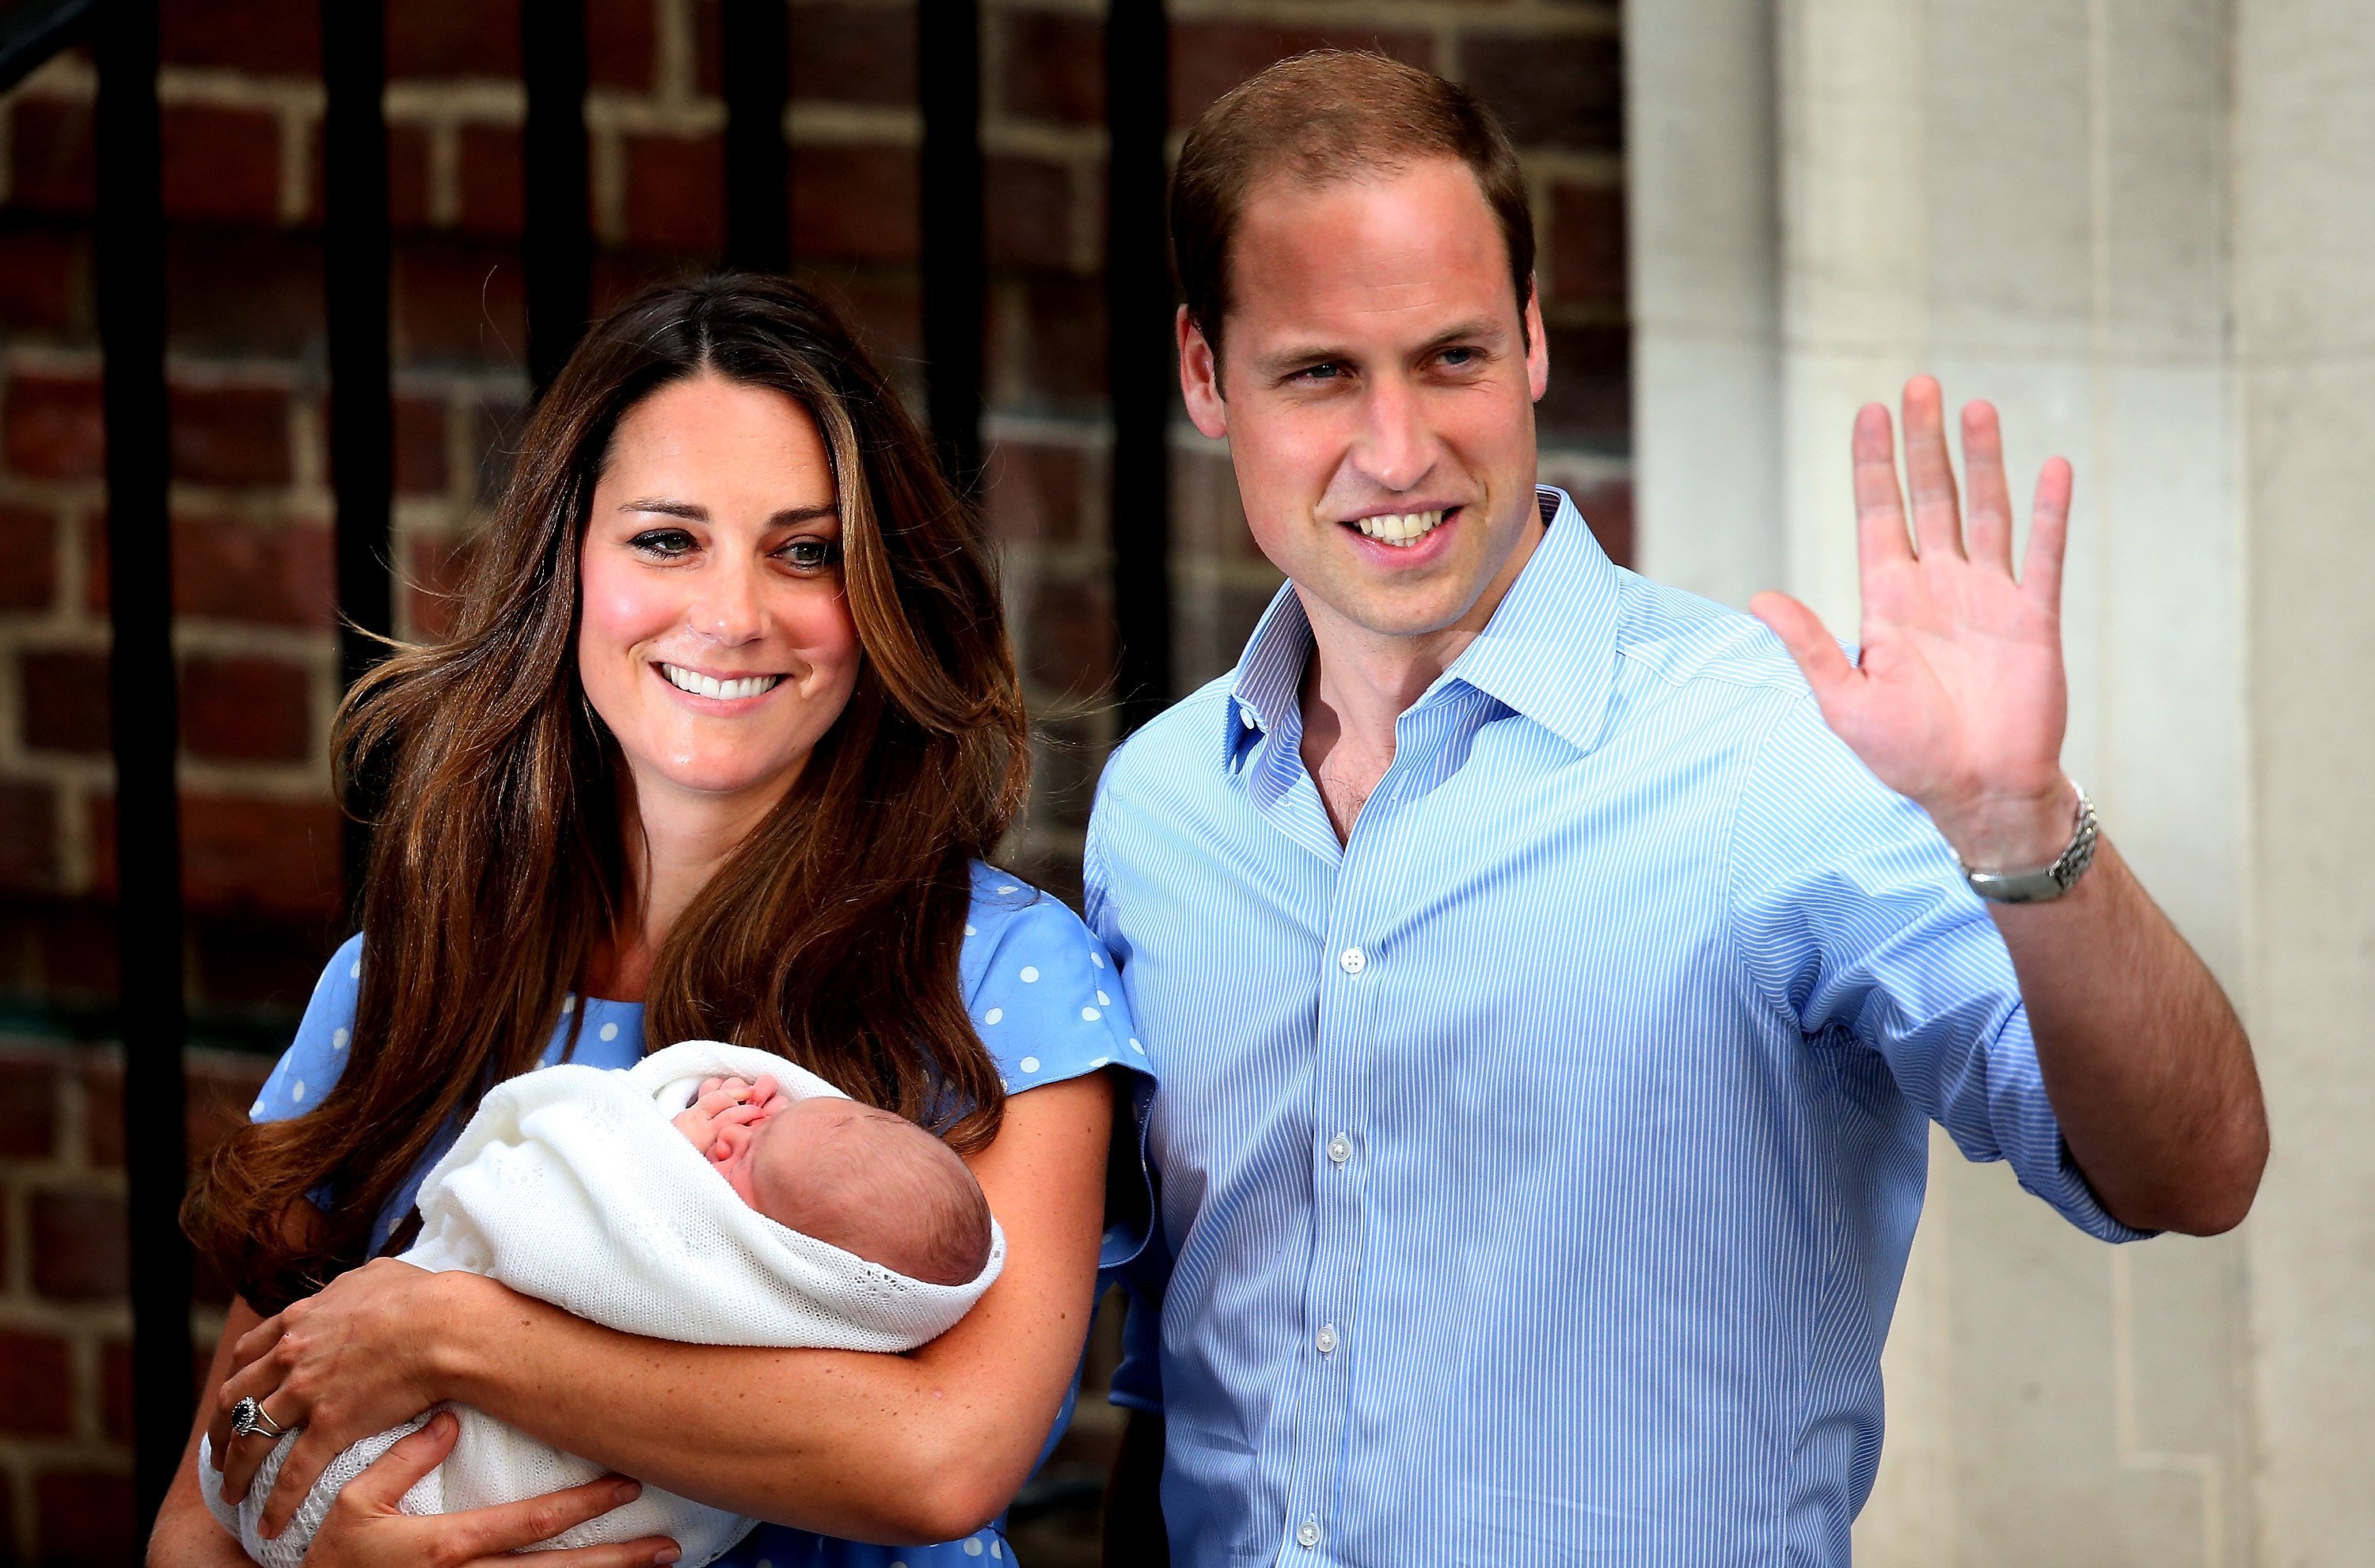 Prince William and Kate Middleton at St Mary's Hospital on July 23, 2013 in London | Photo: Getty Images